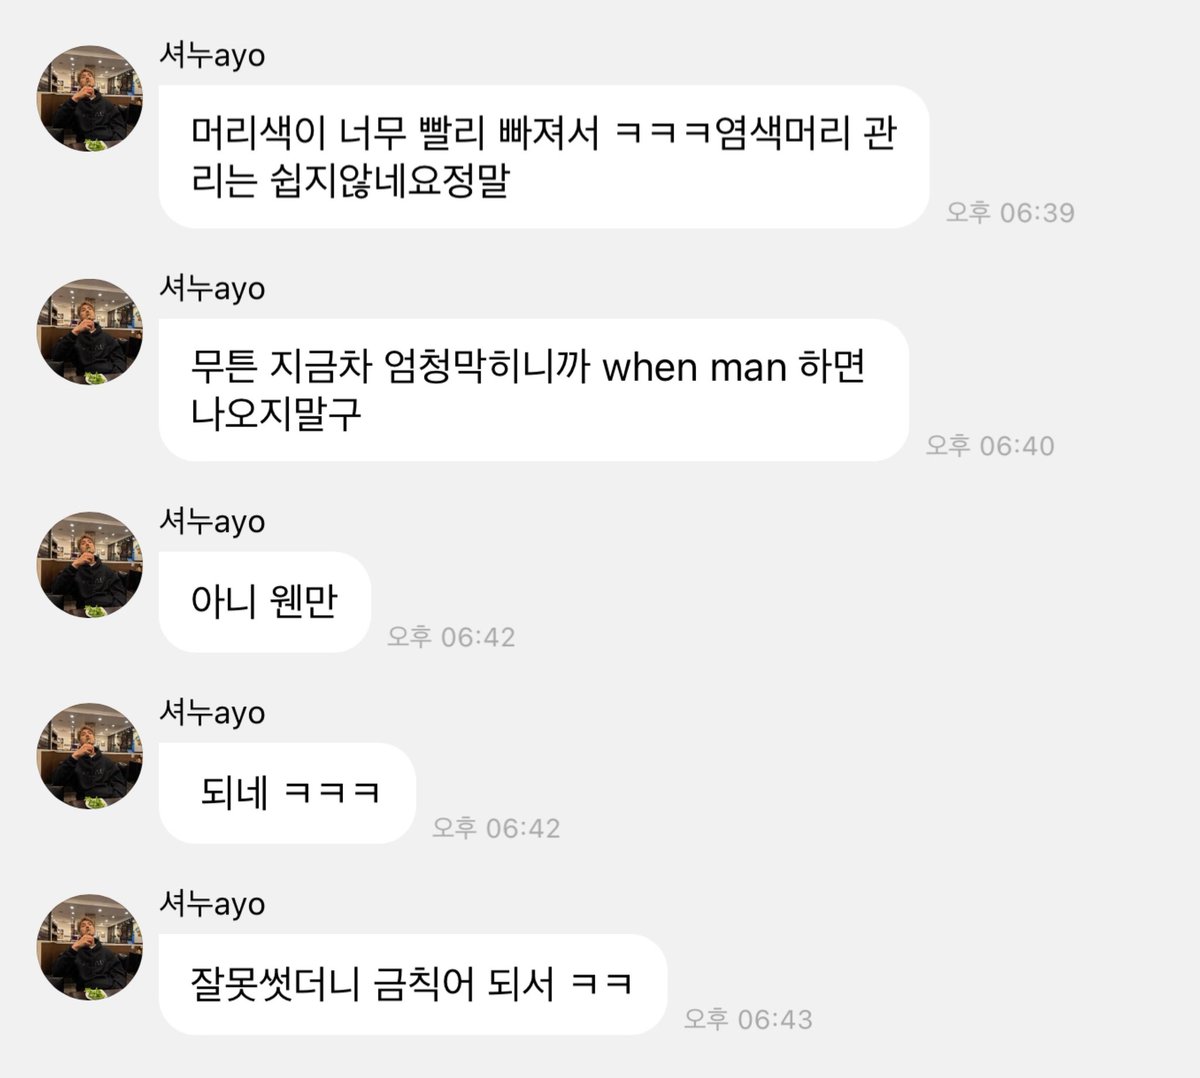 🐻: My hair color fades too fast ㅋㅋㅋ It's really not easy to take good care of dyed hair. 
🐻: Anyways, the traffic is jammed at this time, so don't come out if you possibly can (the word 웬만 is read as when-man. 

+